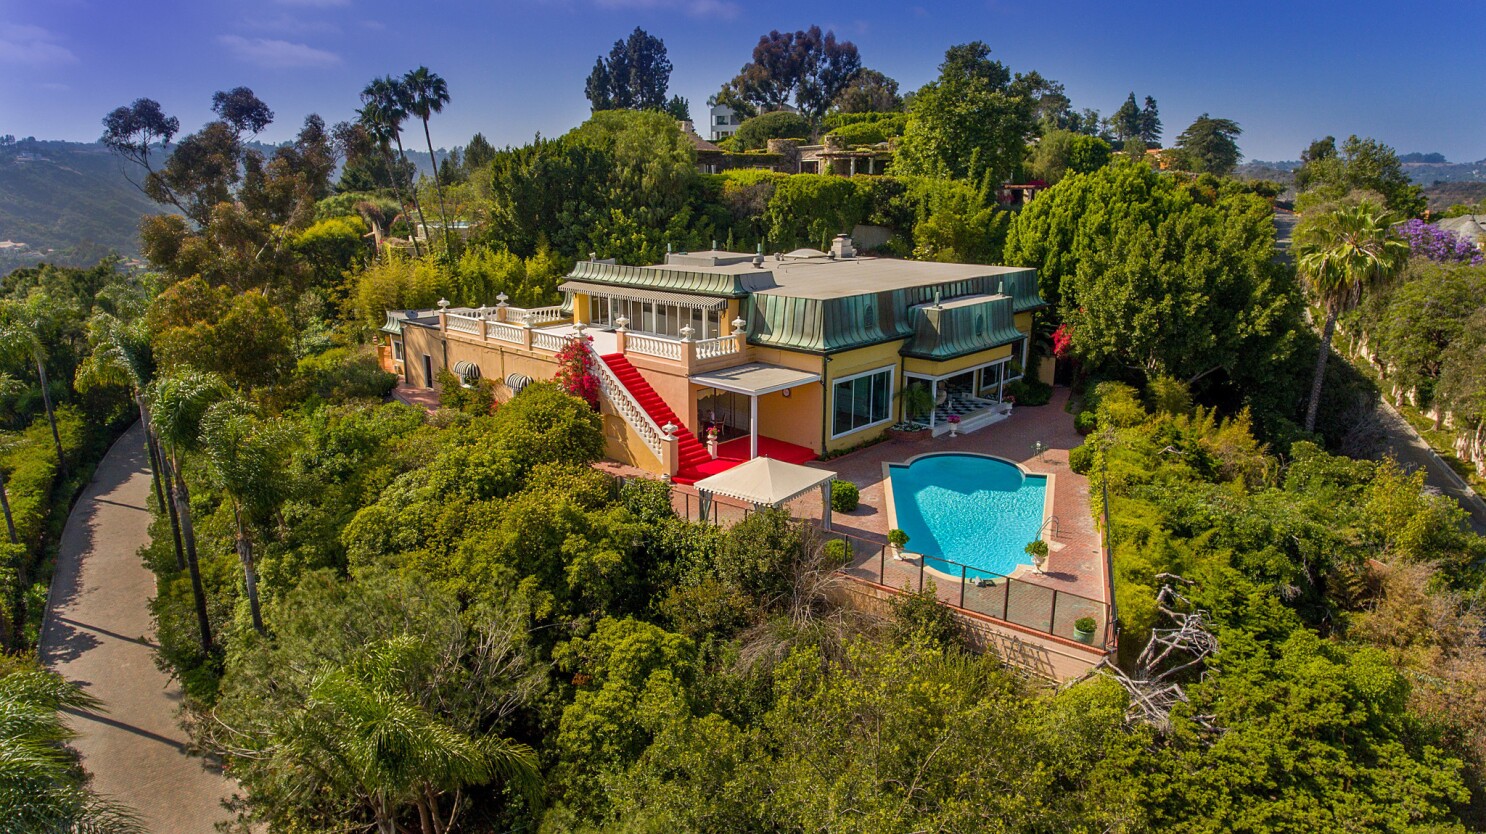 Zsa Zsa Gabor's onetime home in Bel-Air $20.8 - Los Angeles Times